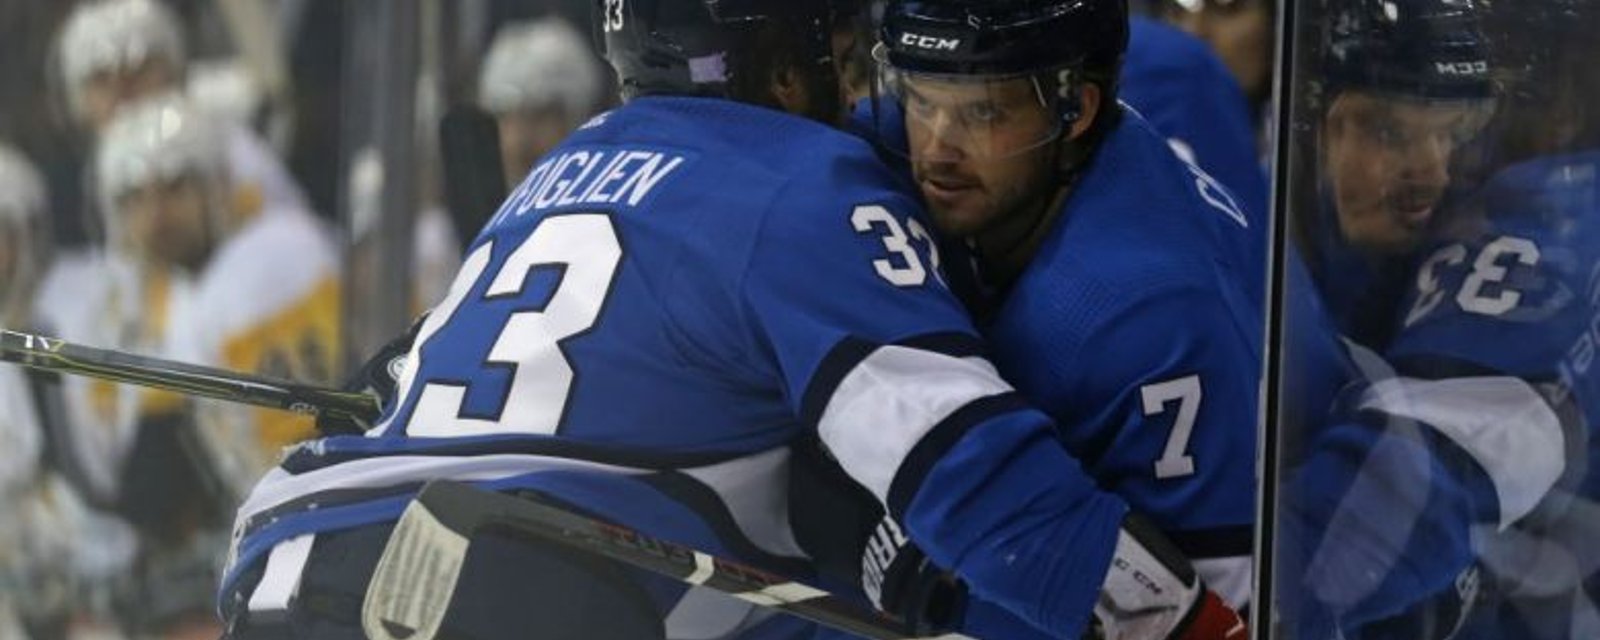 Stunning update on Byfuglien's condition following massive hit during Tuesday's game!